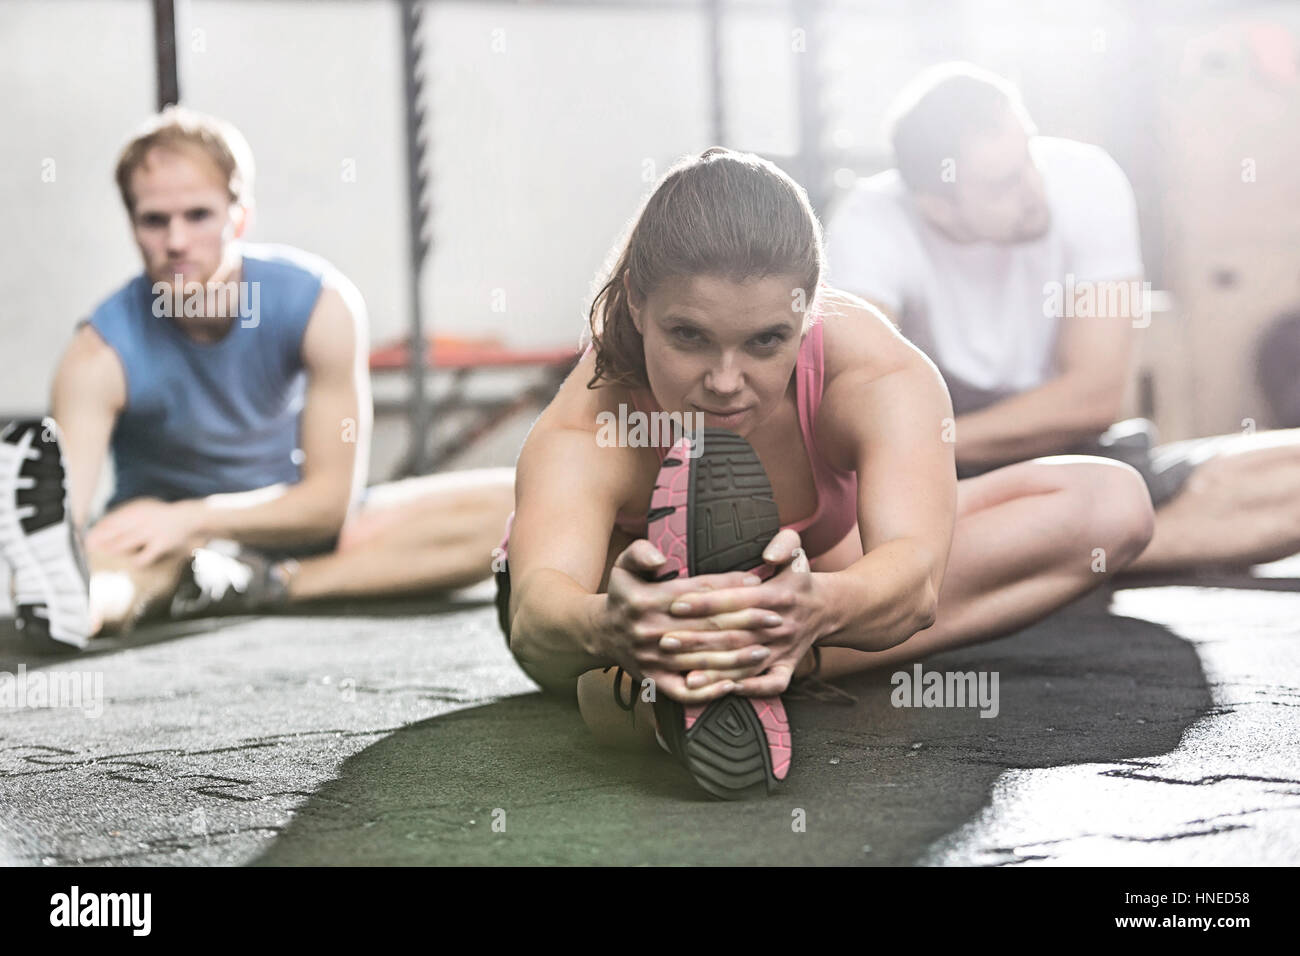 Portrait of woman exercising in crossfit gym Banque D'Images